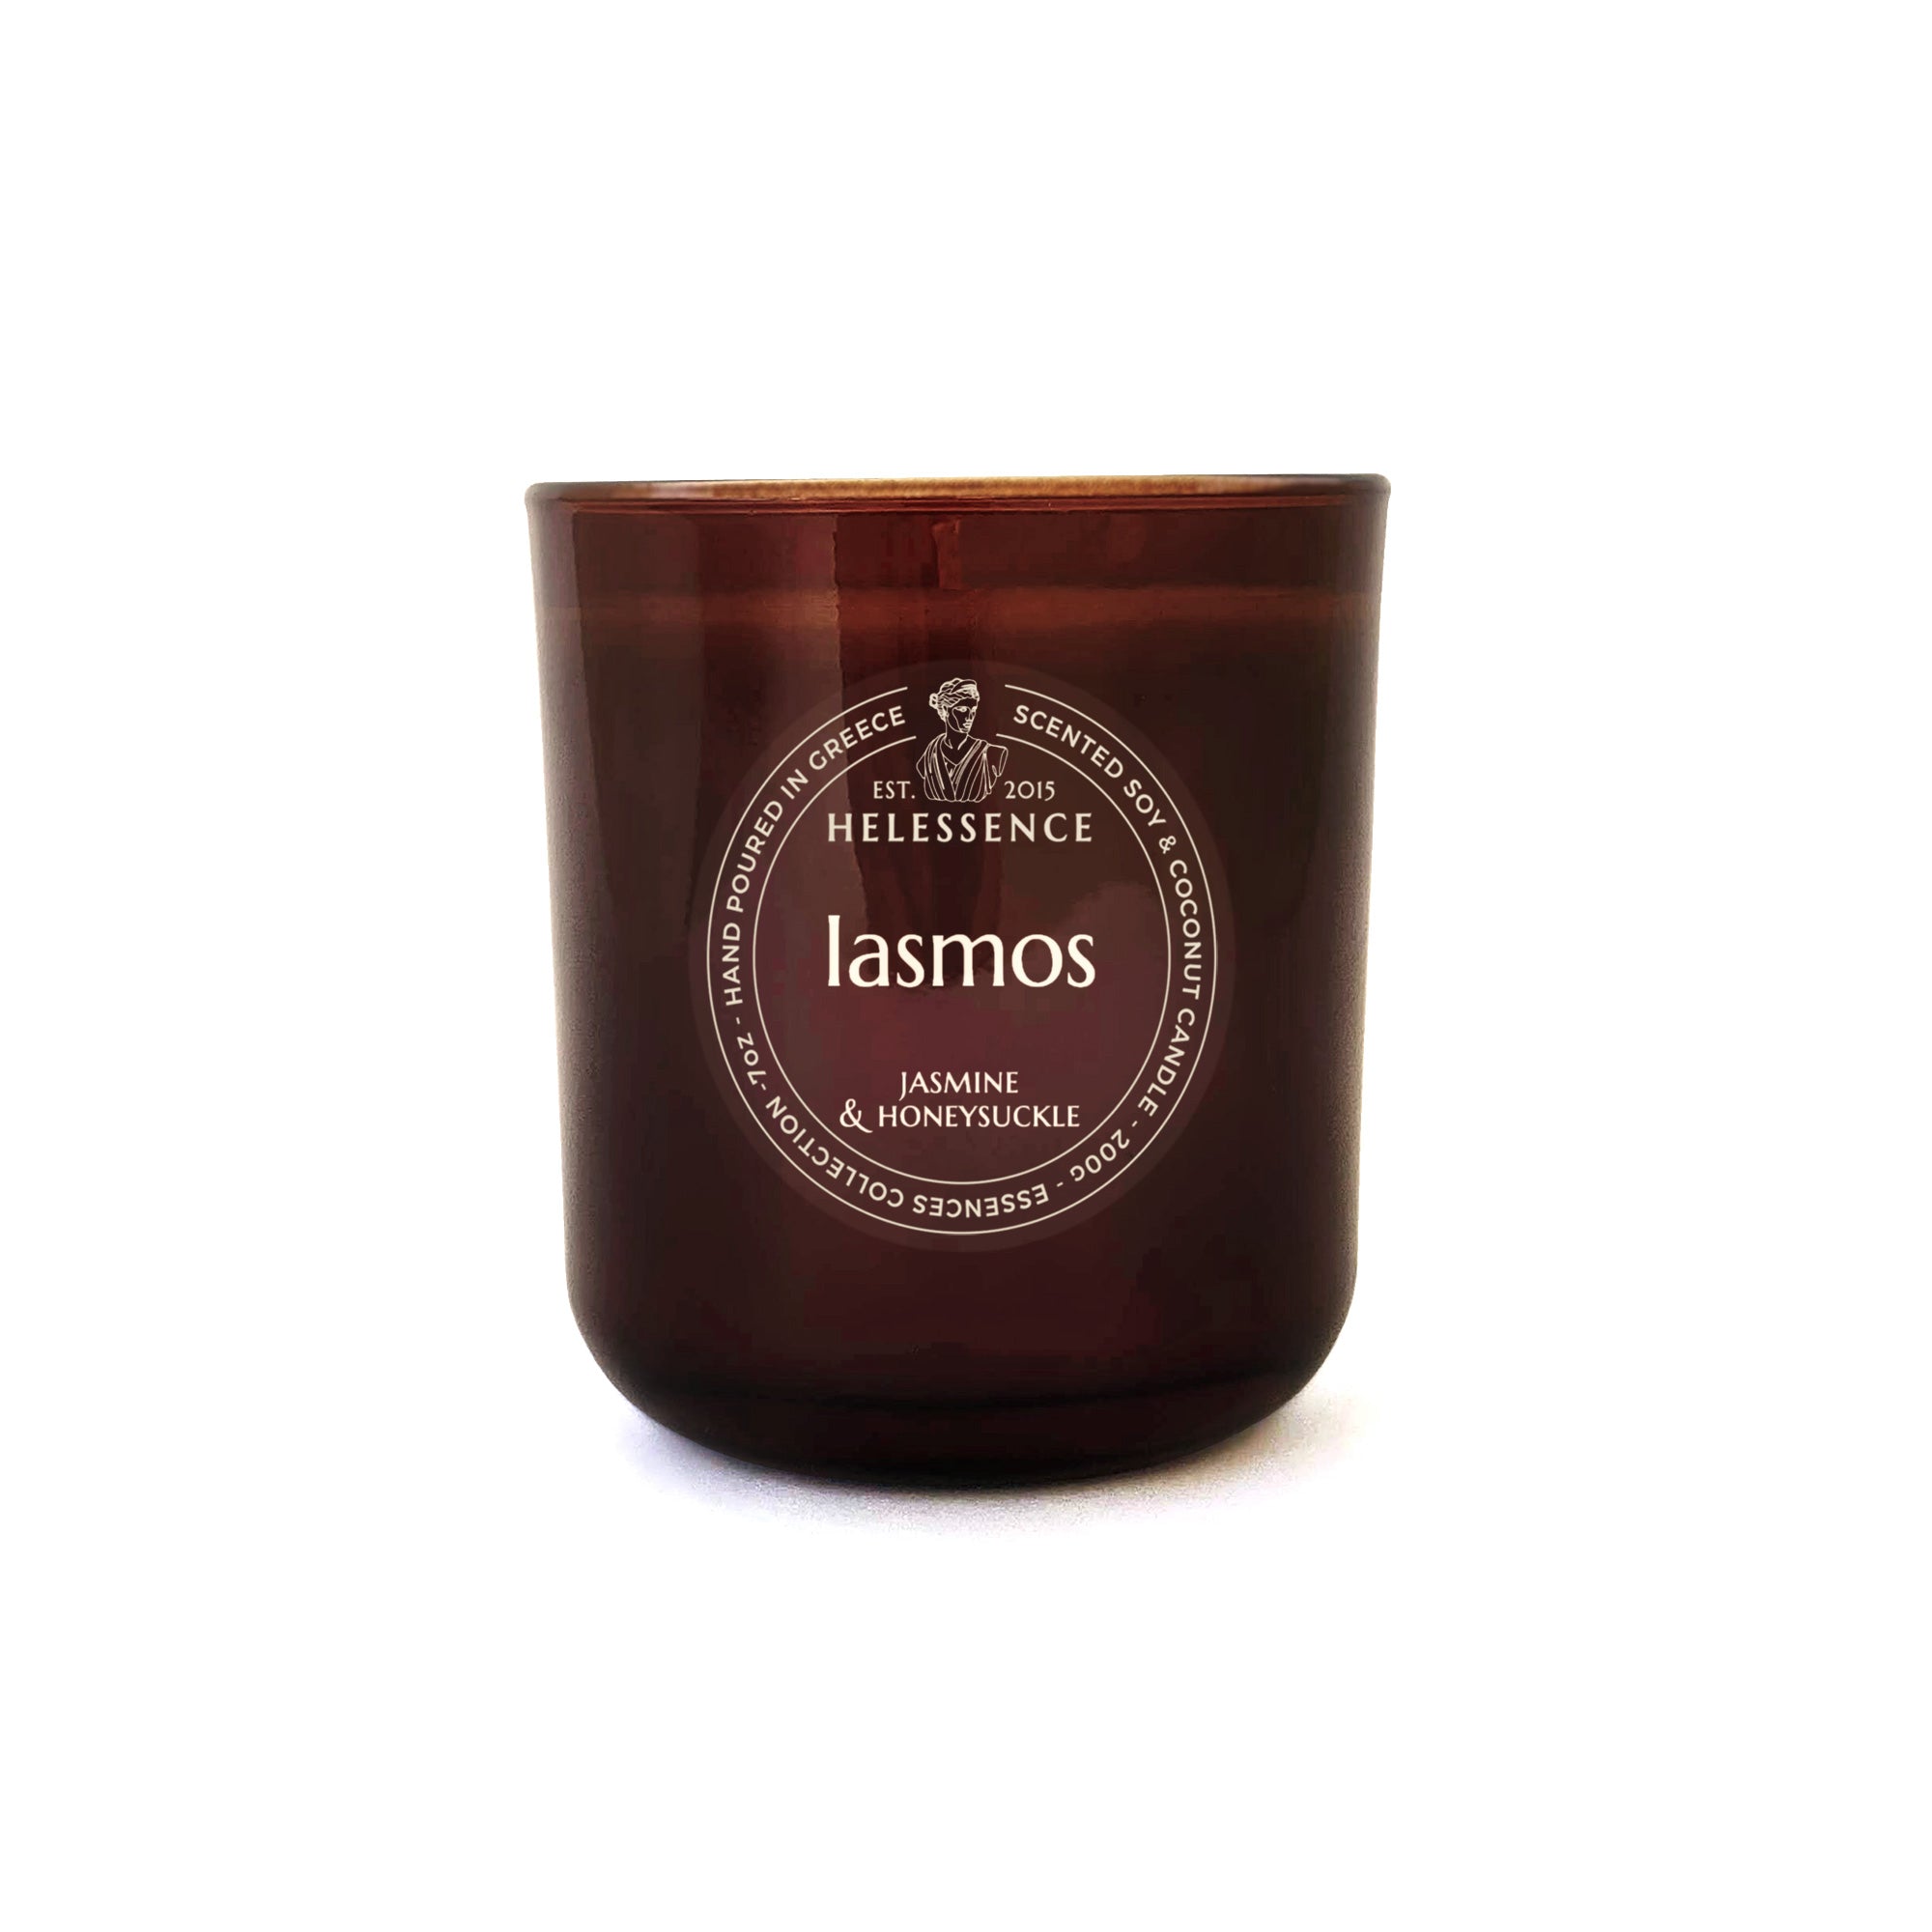 Iasmos Scented Candle